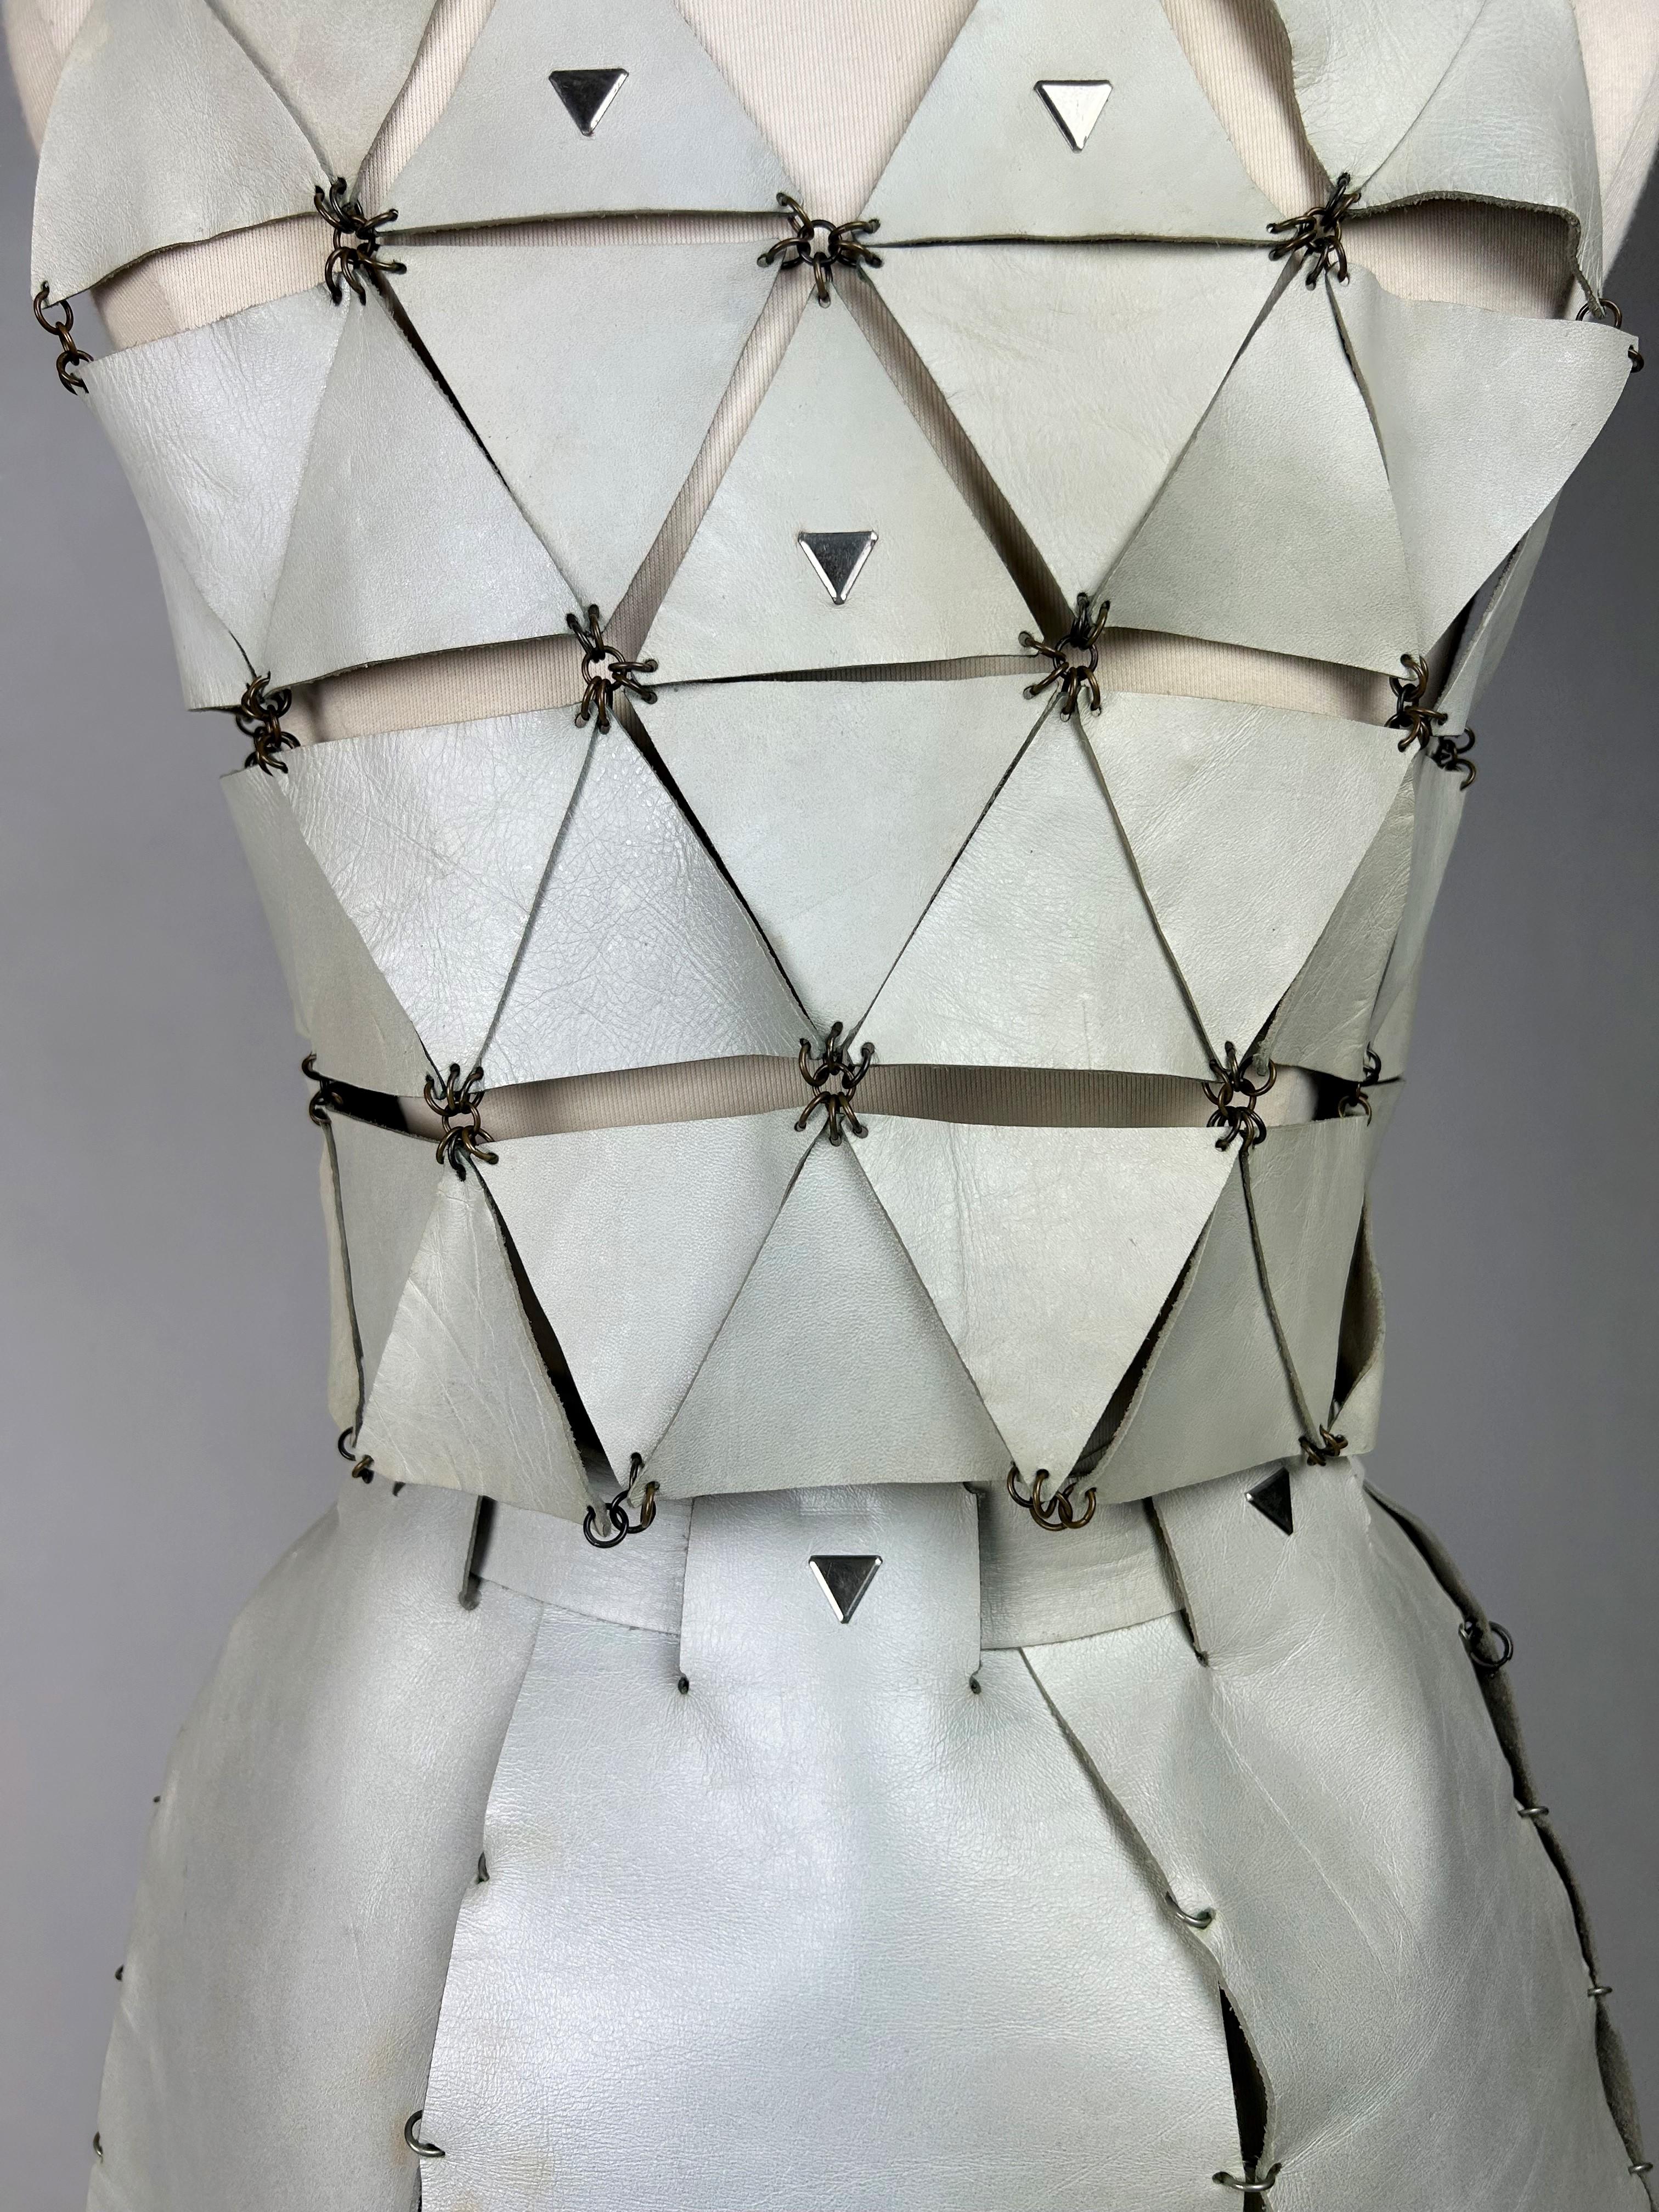 A Couture Leather skirt and top set by Paco Rabanne - Paris 1967 For Sale 1